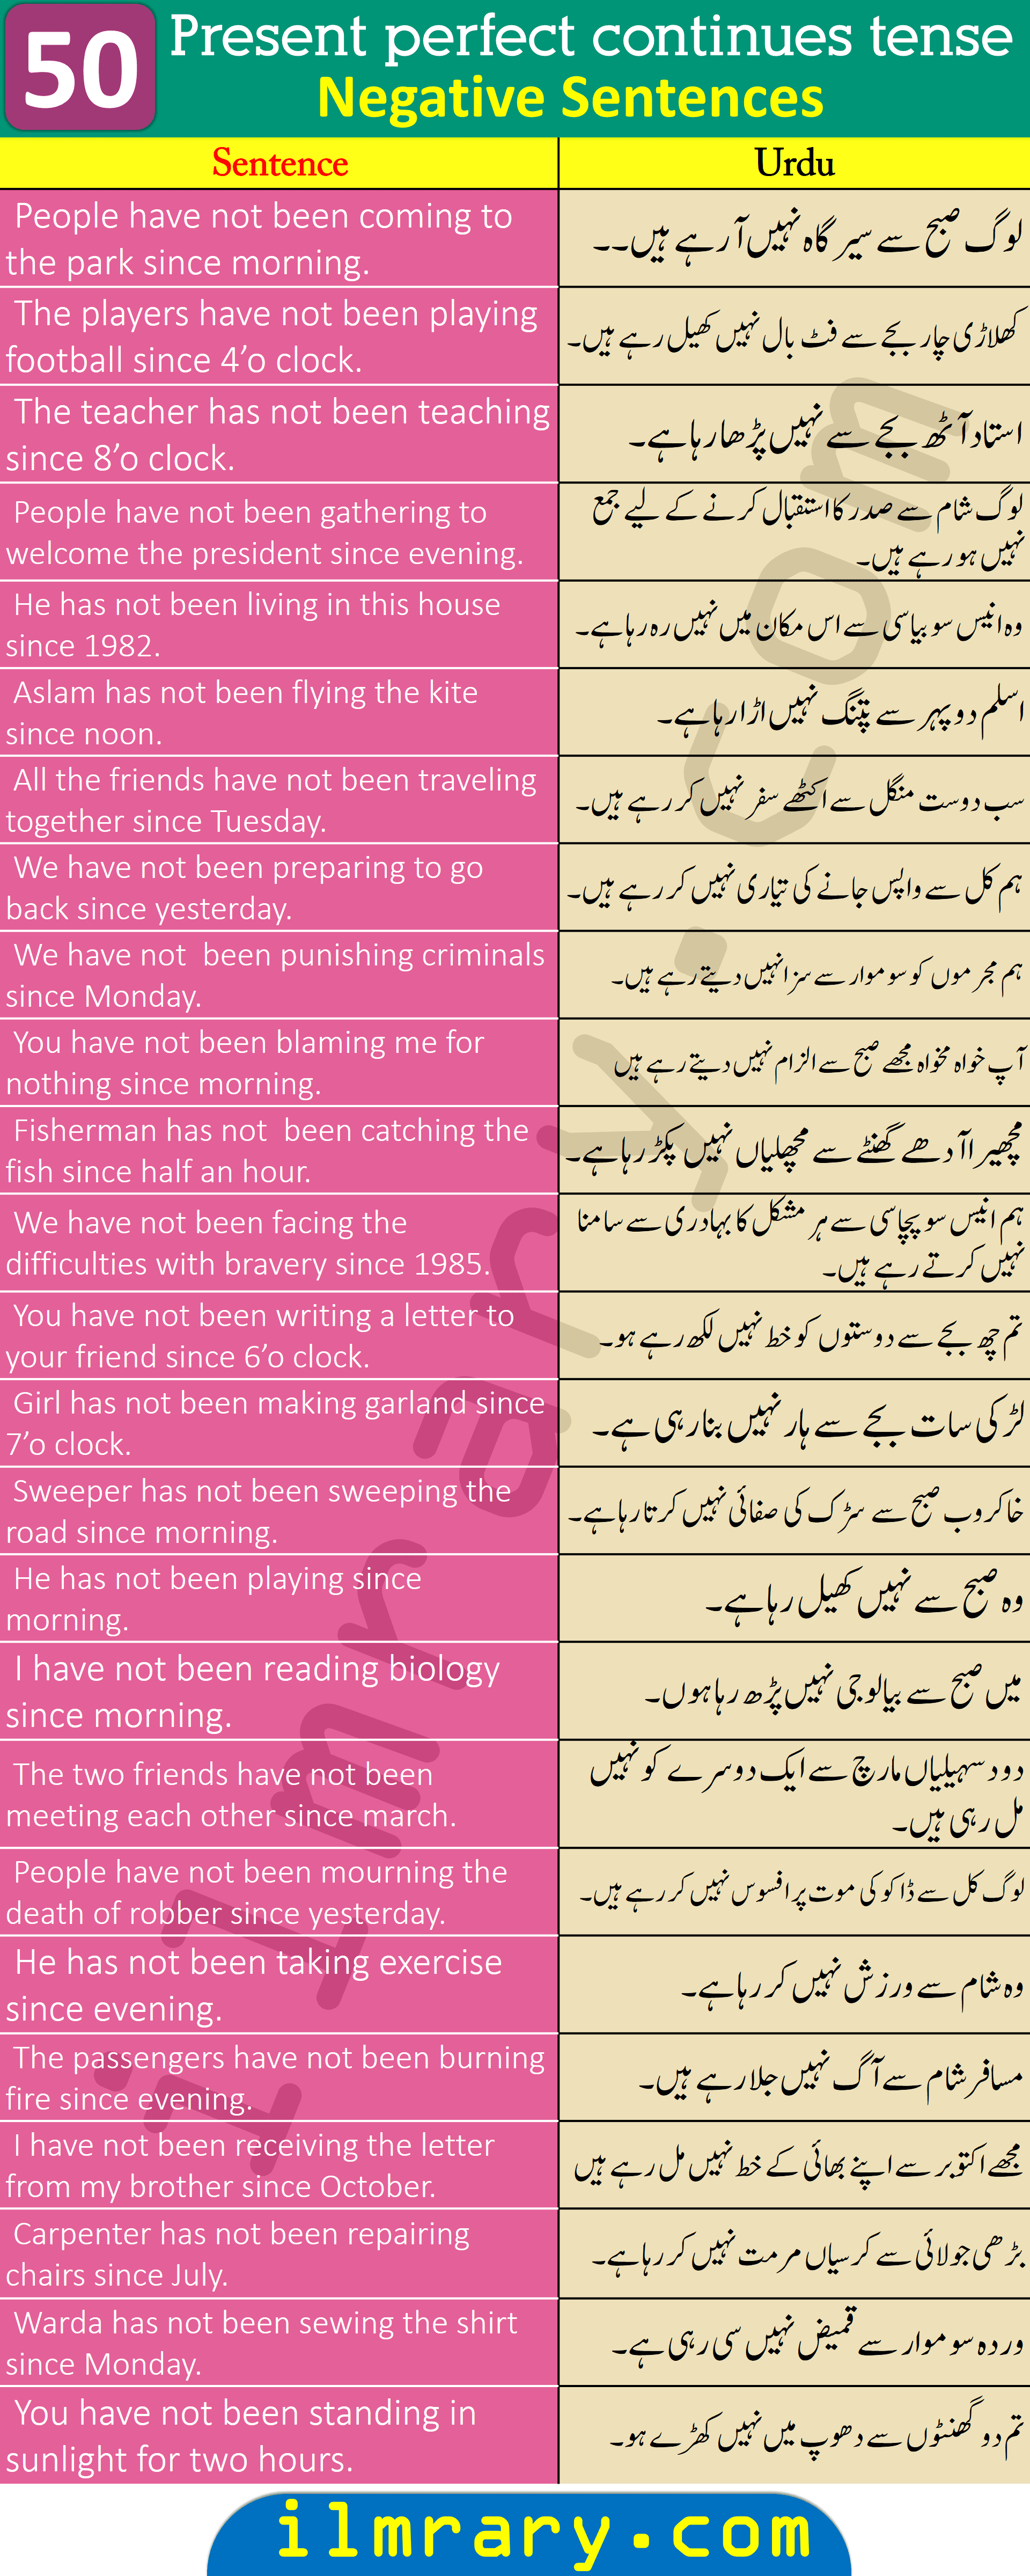 50 Negative Example Sentences for Present Perfect Continuous Tense with Urdu Translation 